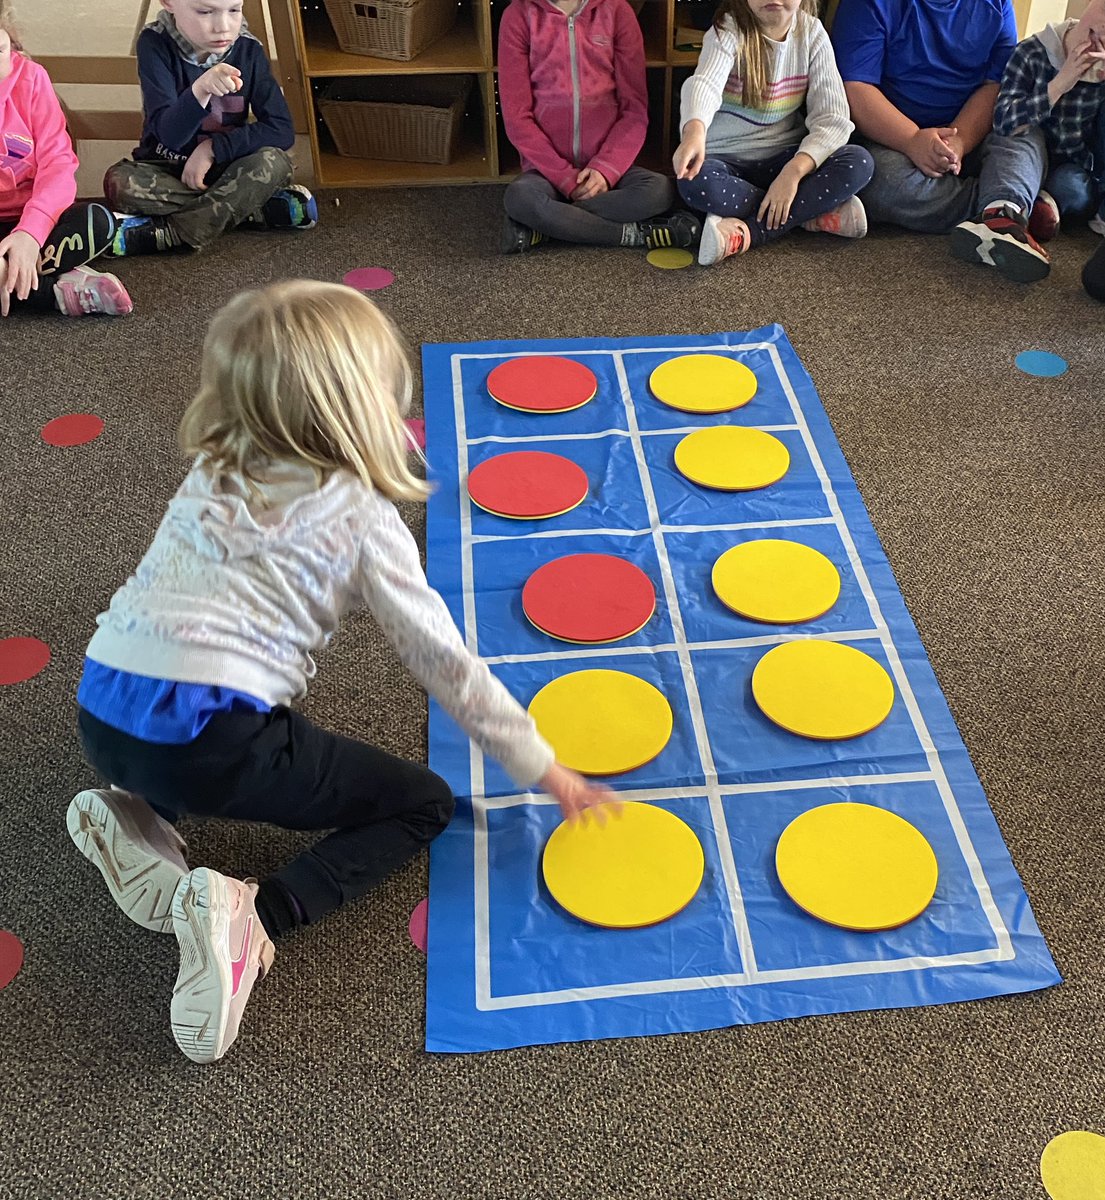 Shake and Spill is much more fun when you get to toss giant counters! @zorrahighland @TVDSBKinder #tvdsbmath